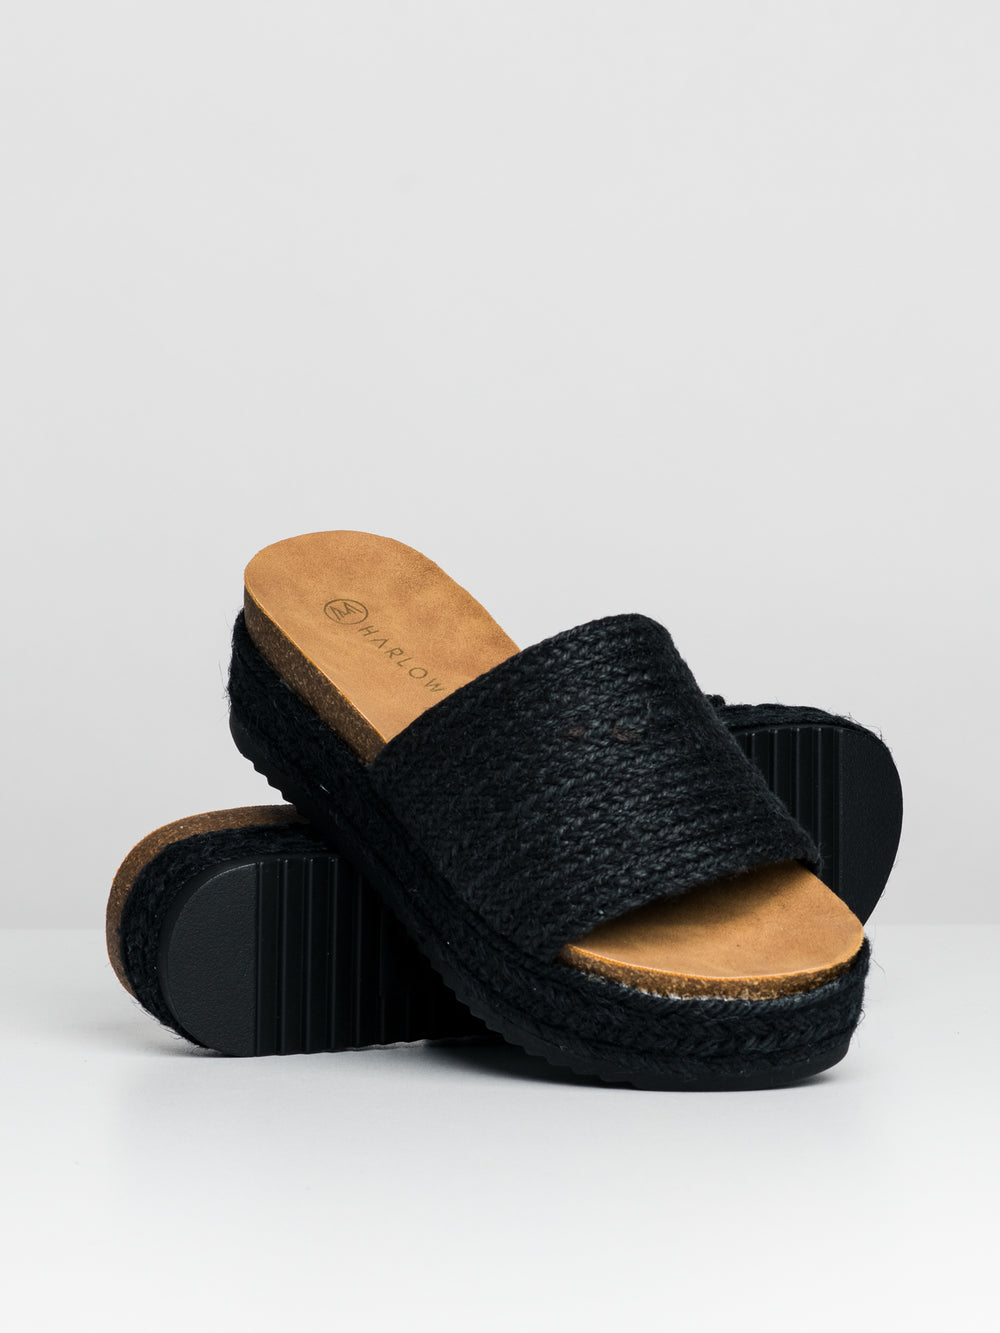 WOMENS HARLOW KAILEE SANDALS - CLEARANCE